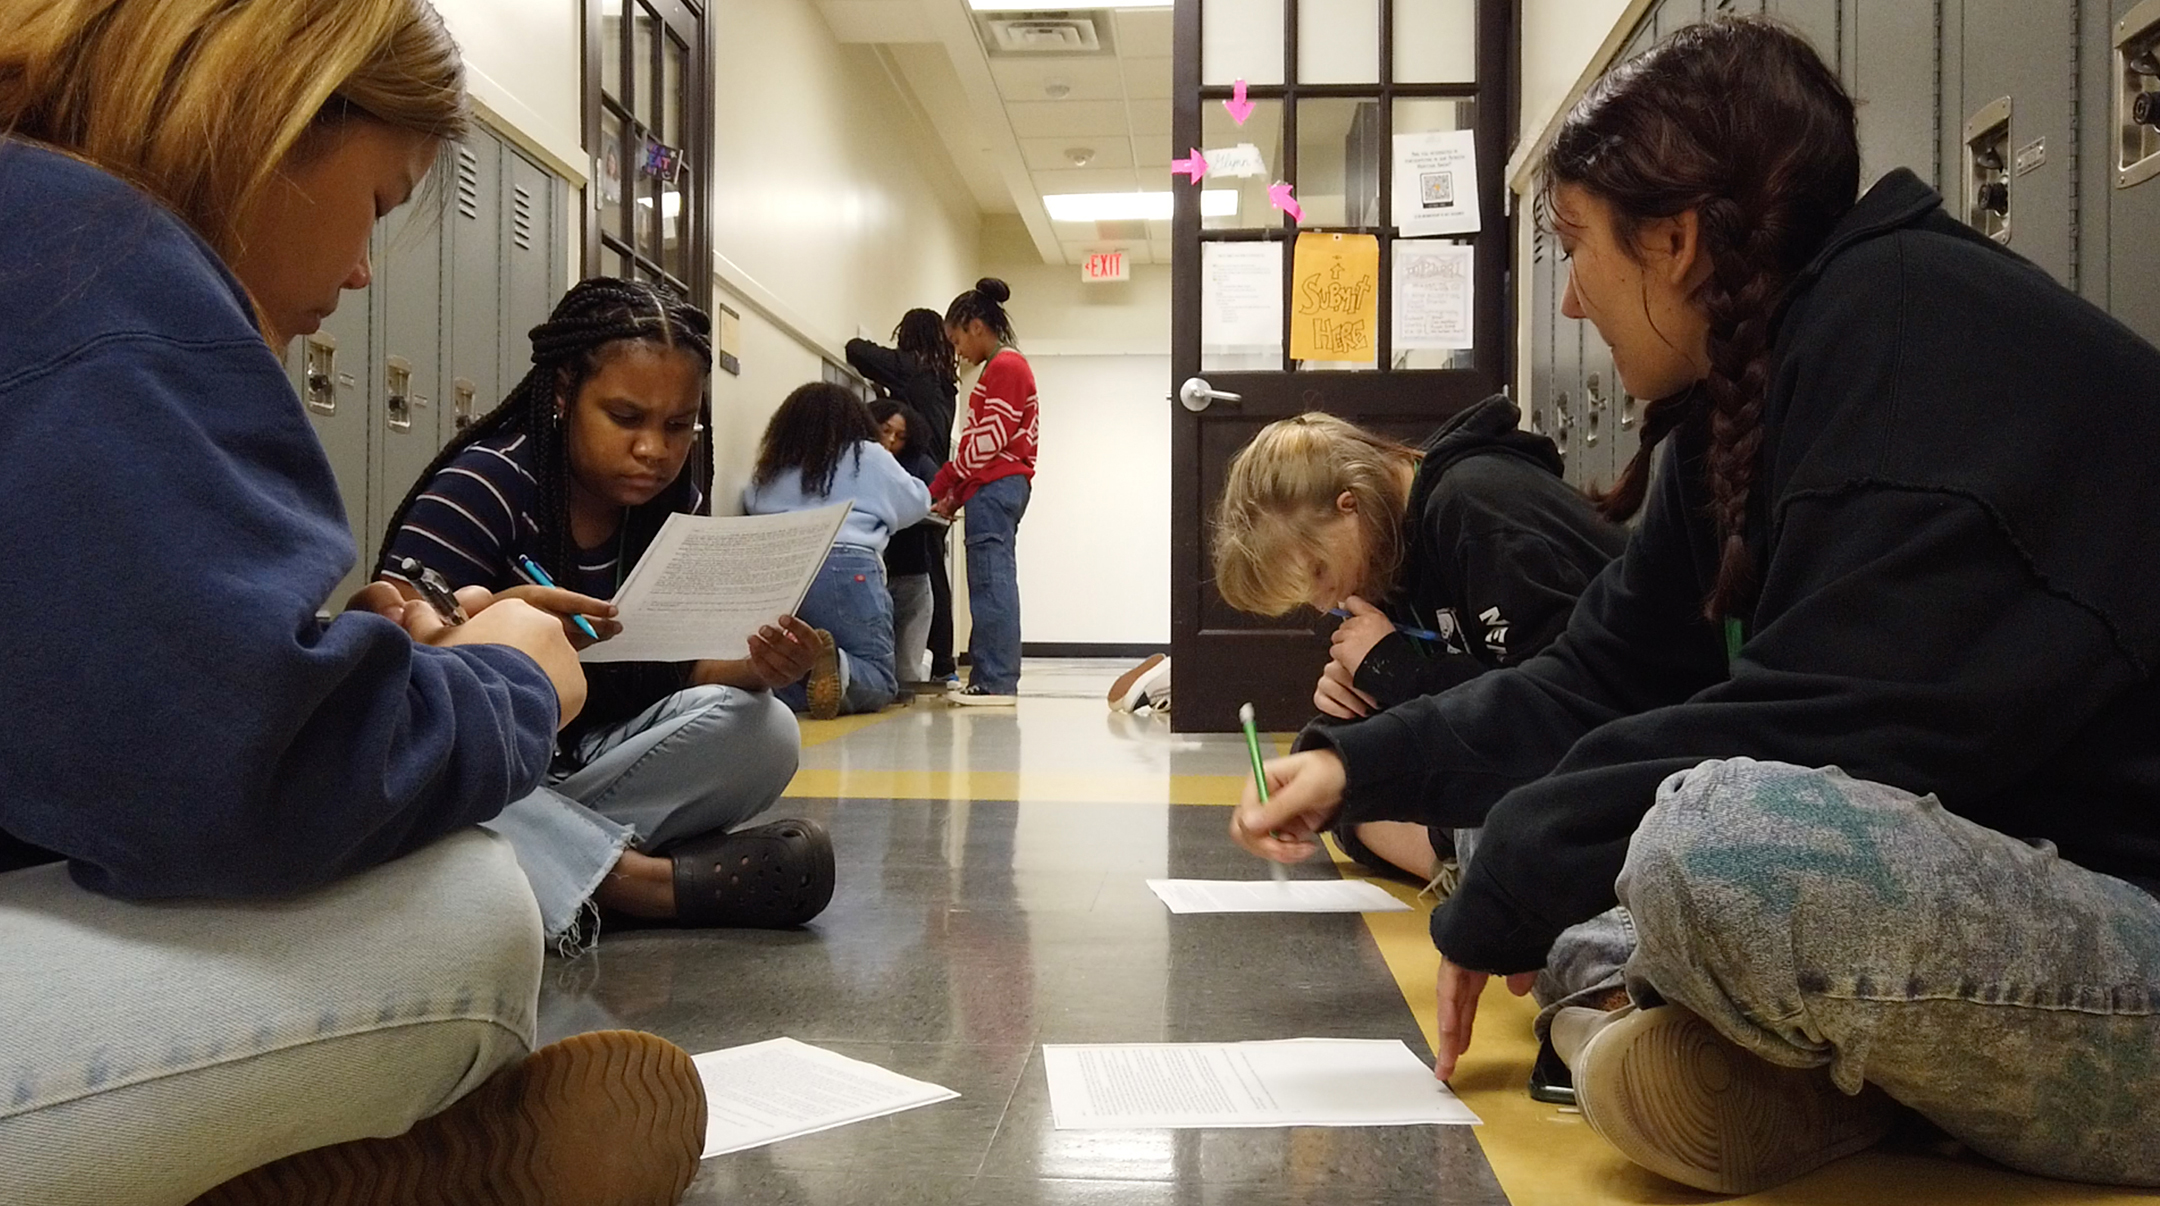 Four students, all female, sit in a high school hallway and work on a project with pencil and paper